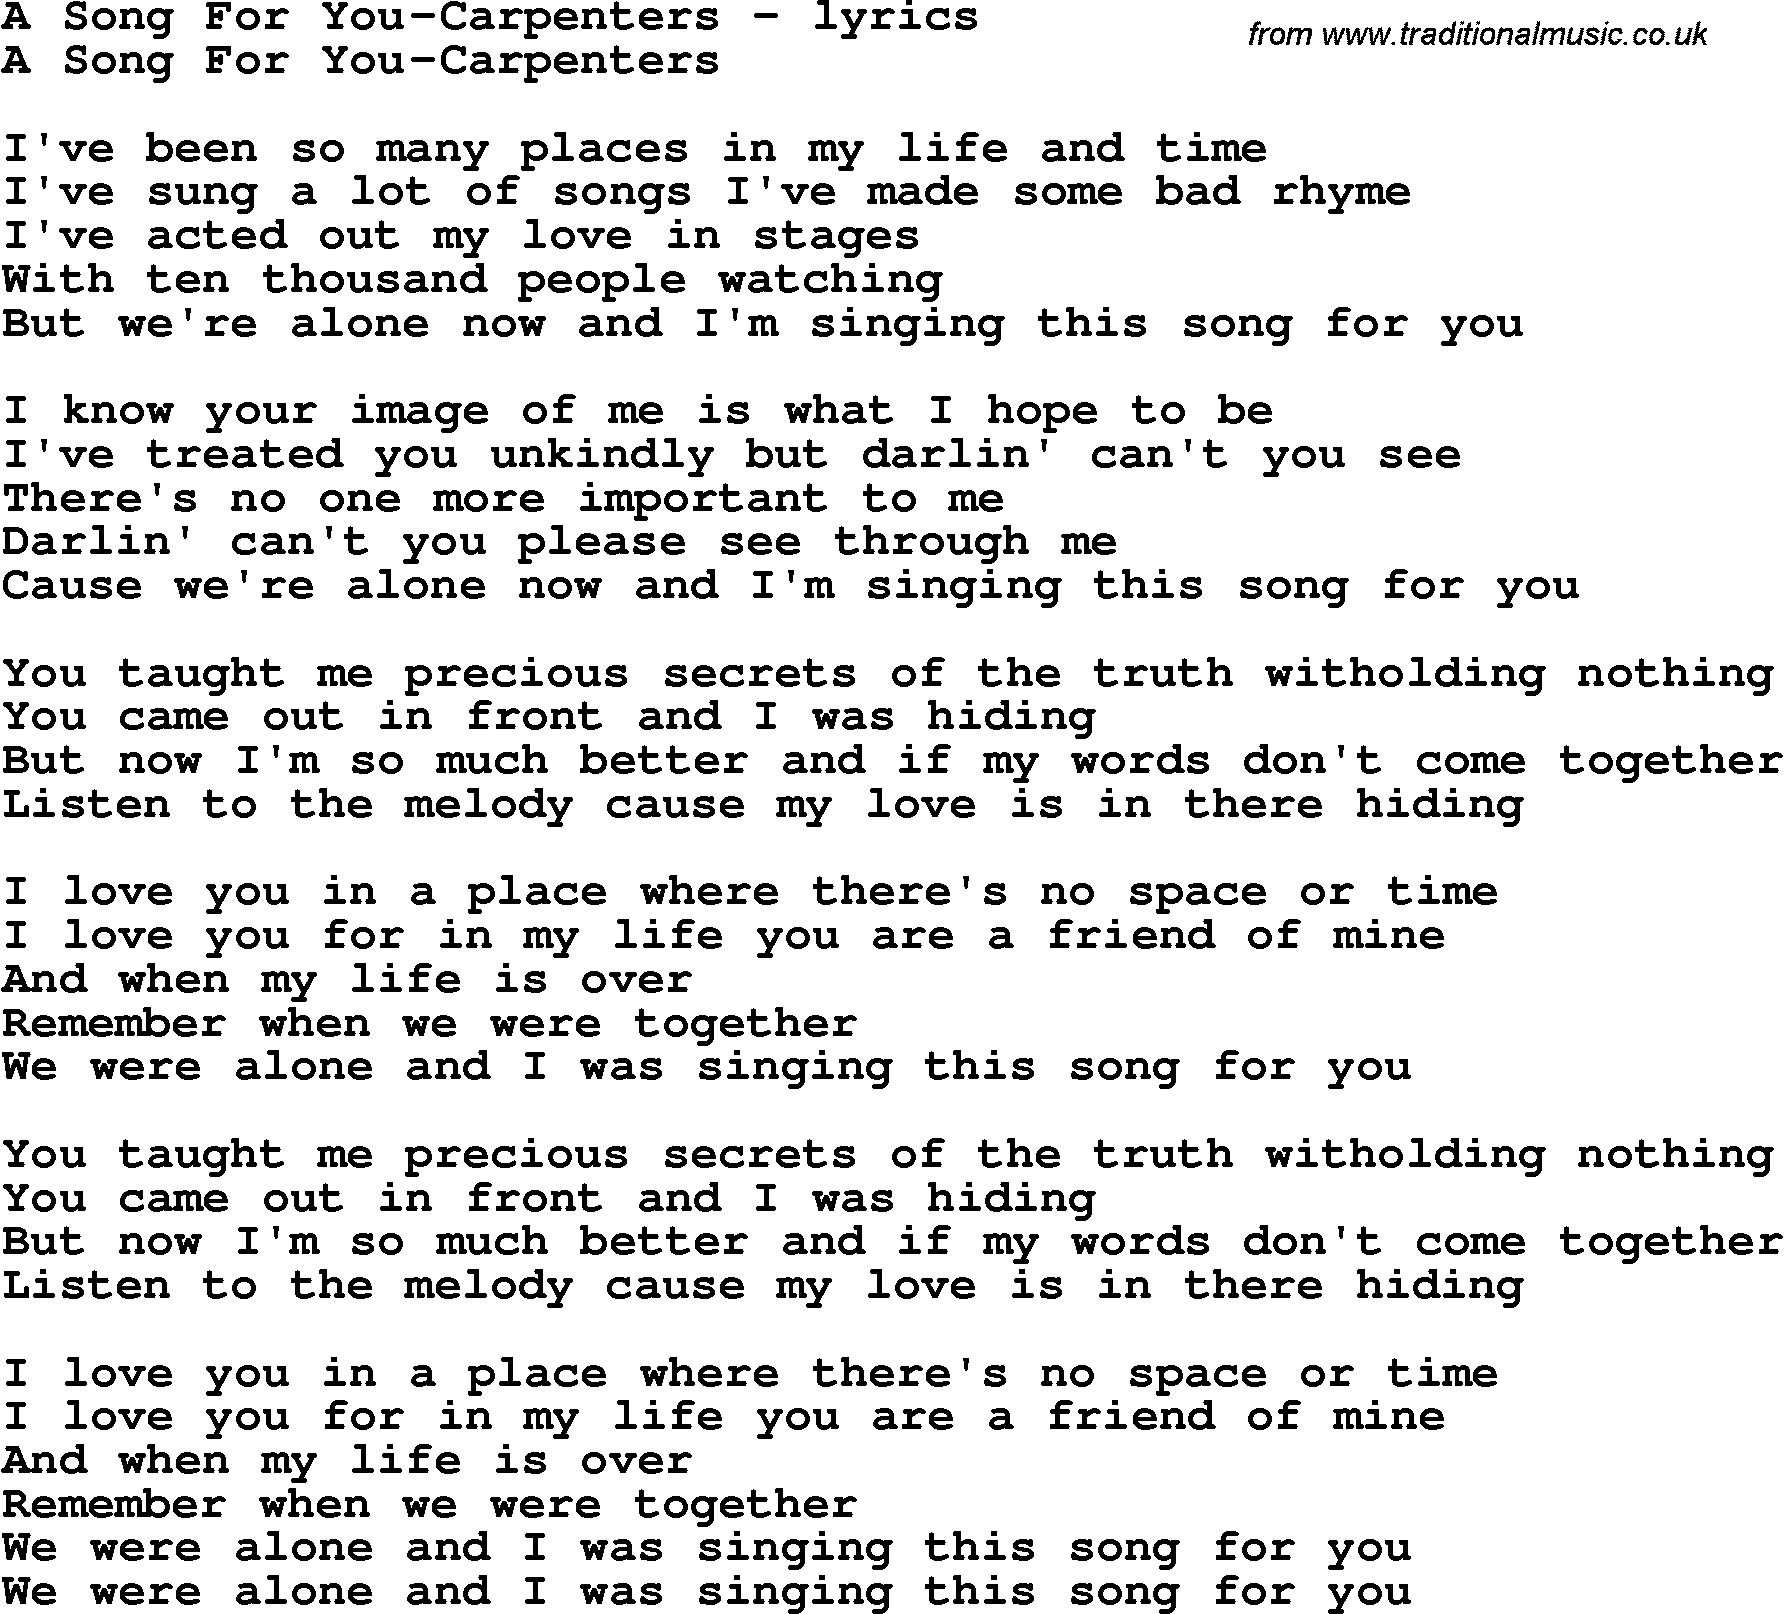 Love Song Lyrics for: A Song For You-Carpenters